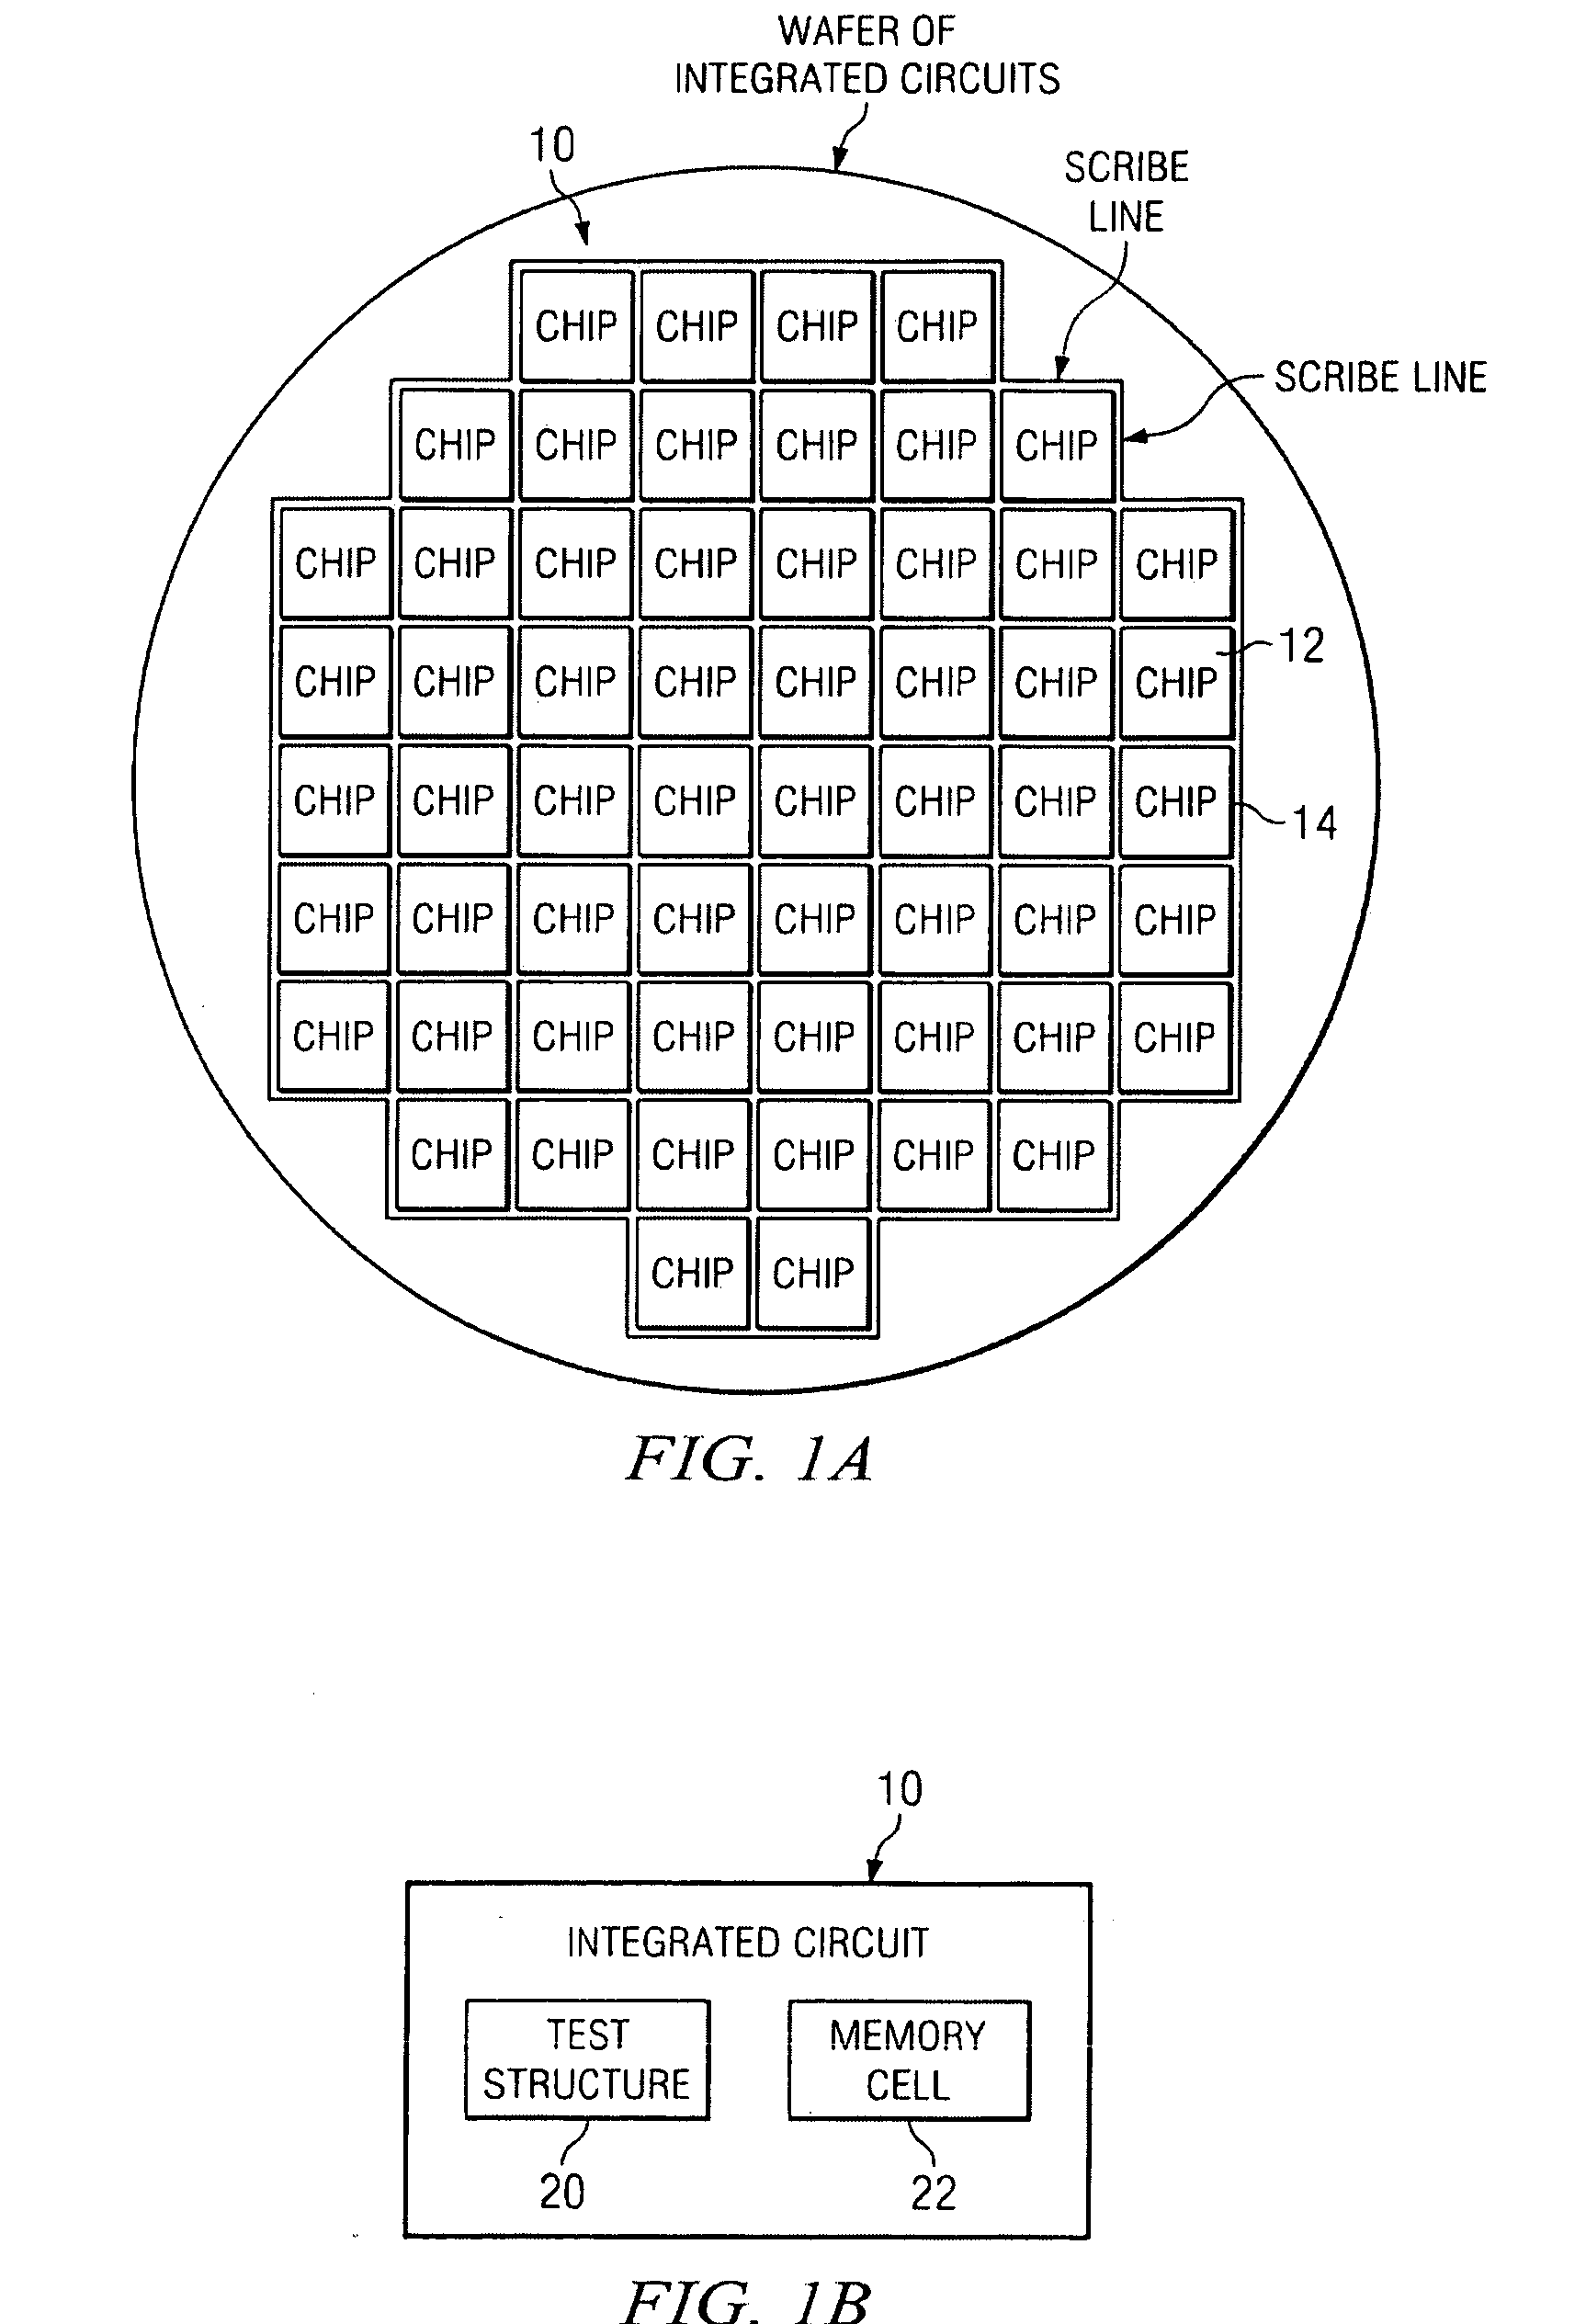 Method for memory cell characterization using universal structure